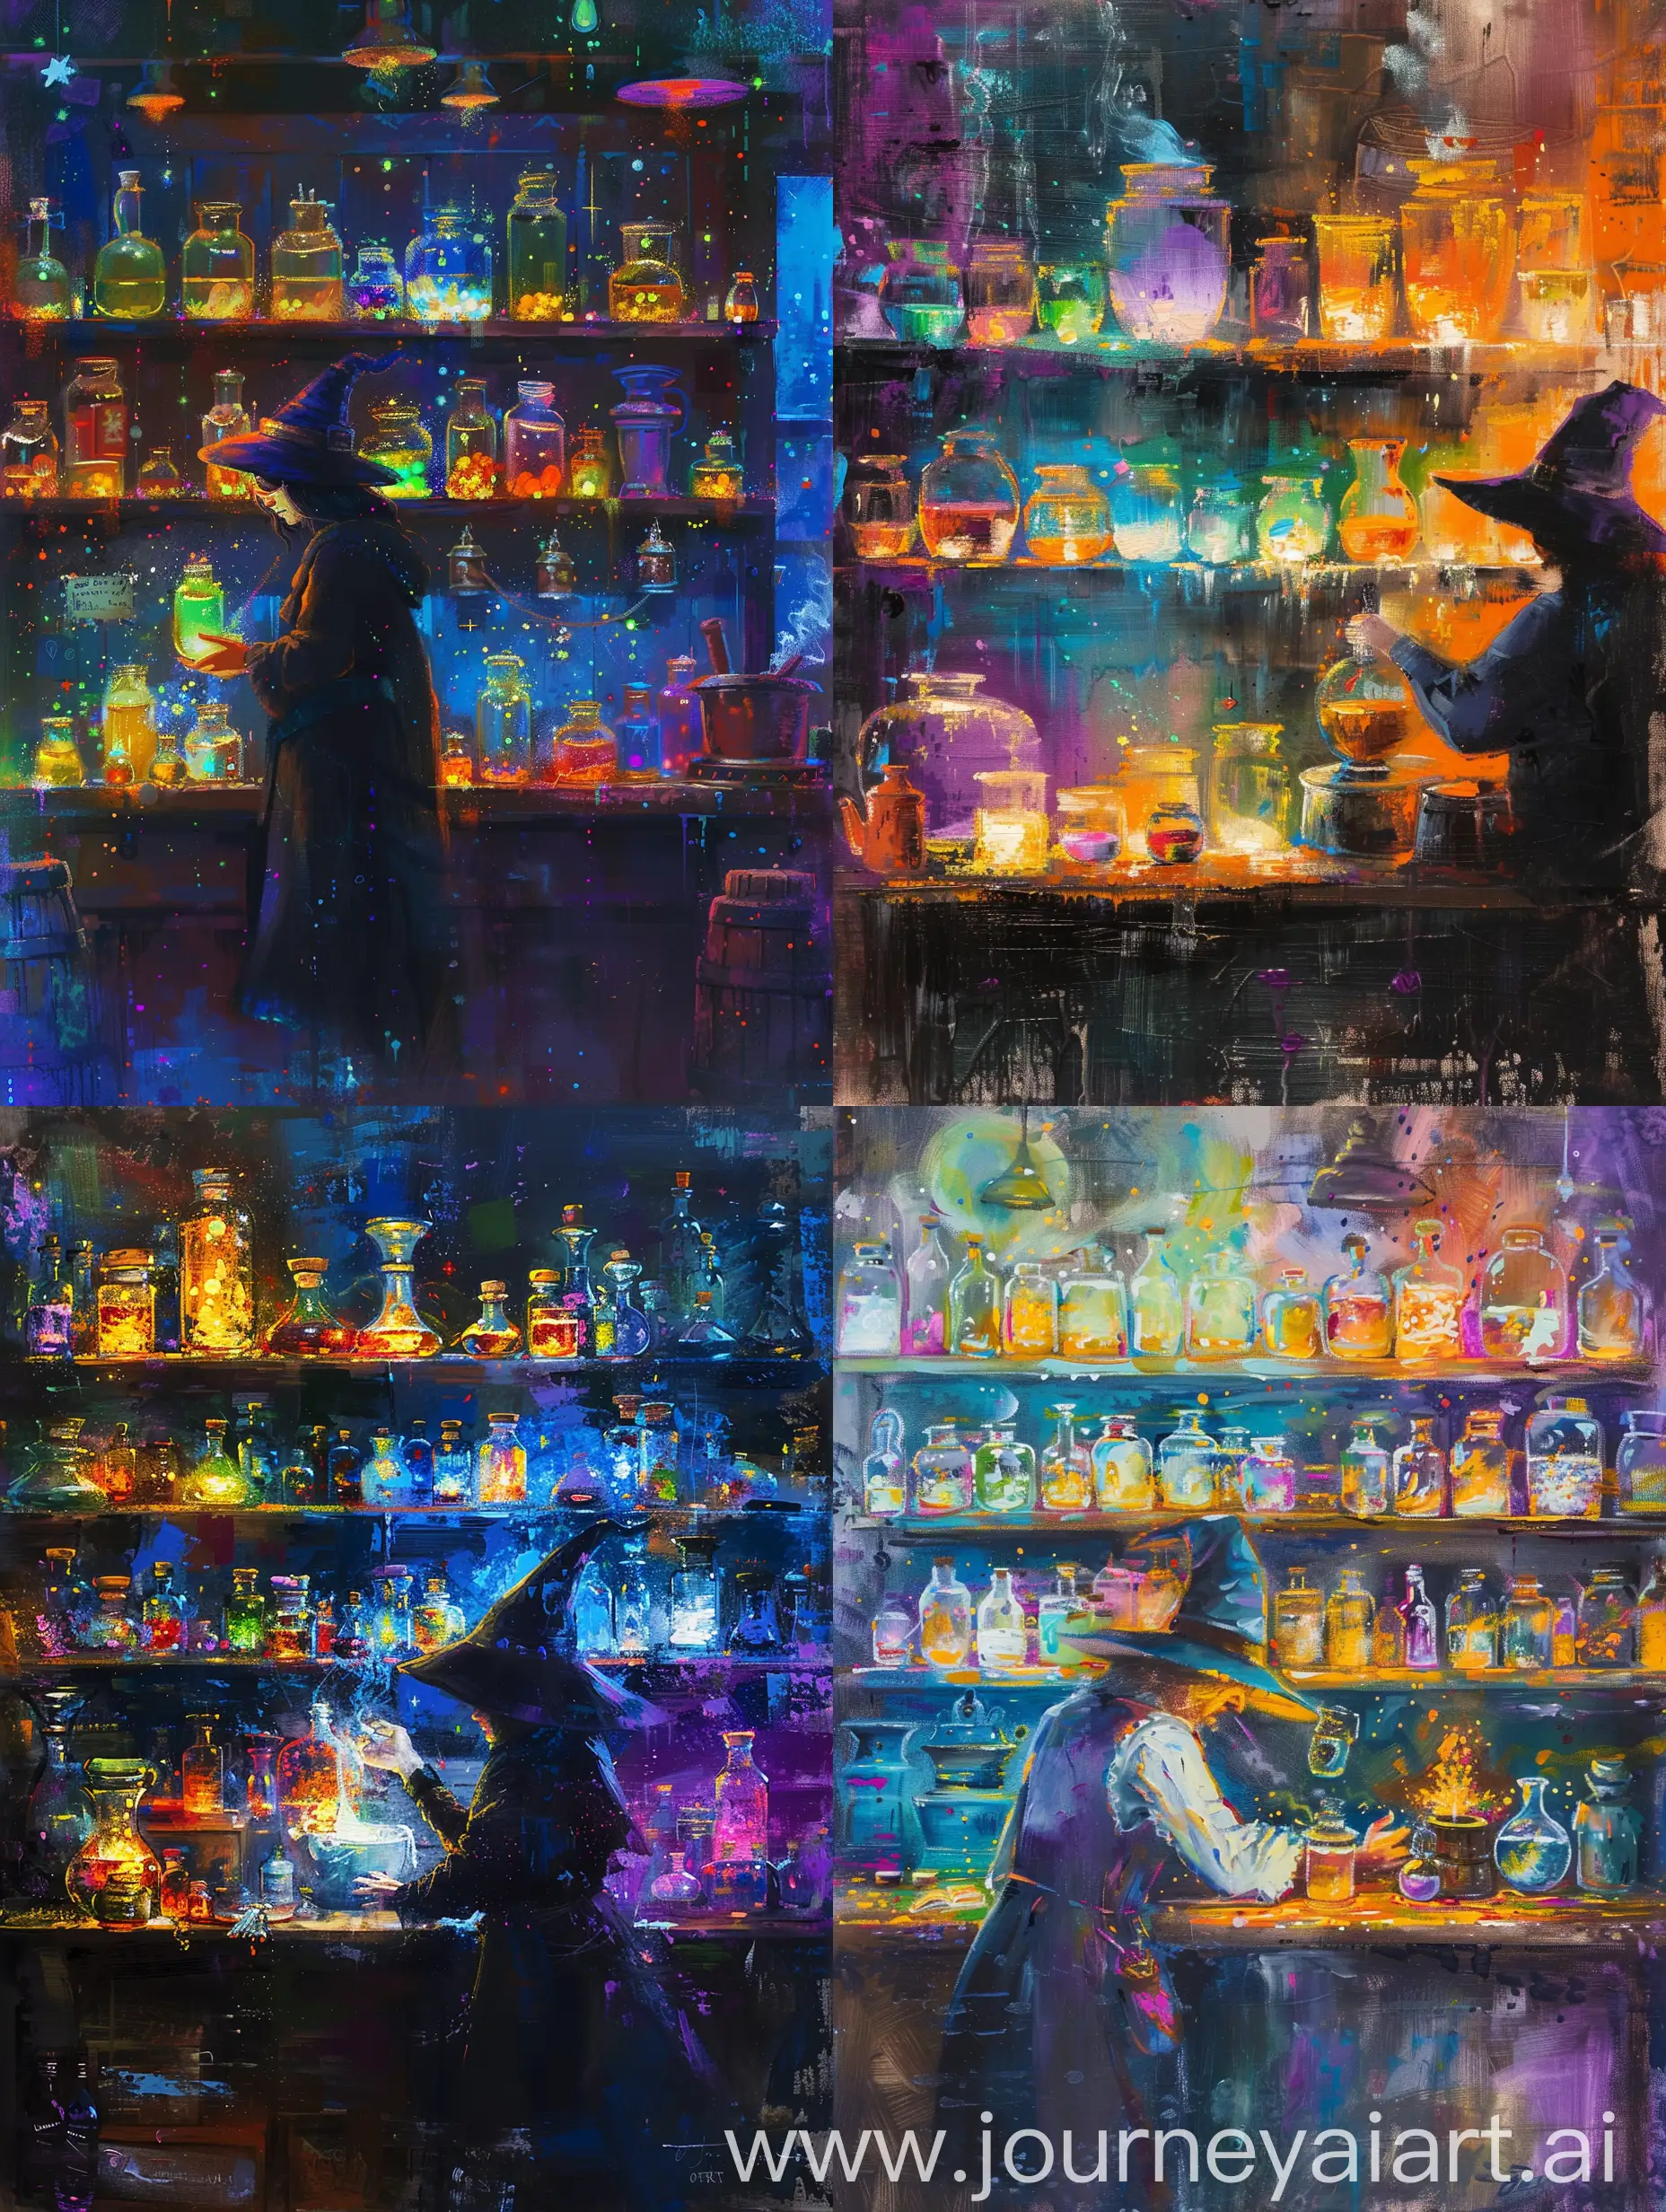 Abstraction painting.Shelves of glowing potions, a witchy shopkeeper concocting a spell, emphasizing the glow and magical details. 